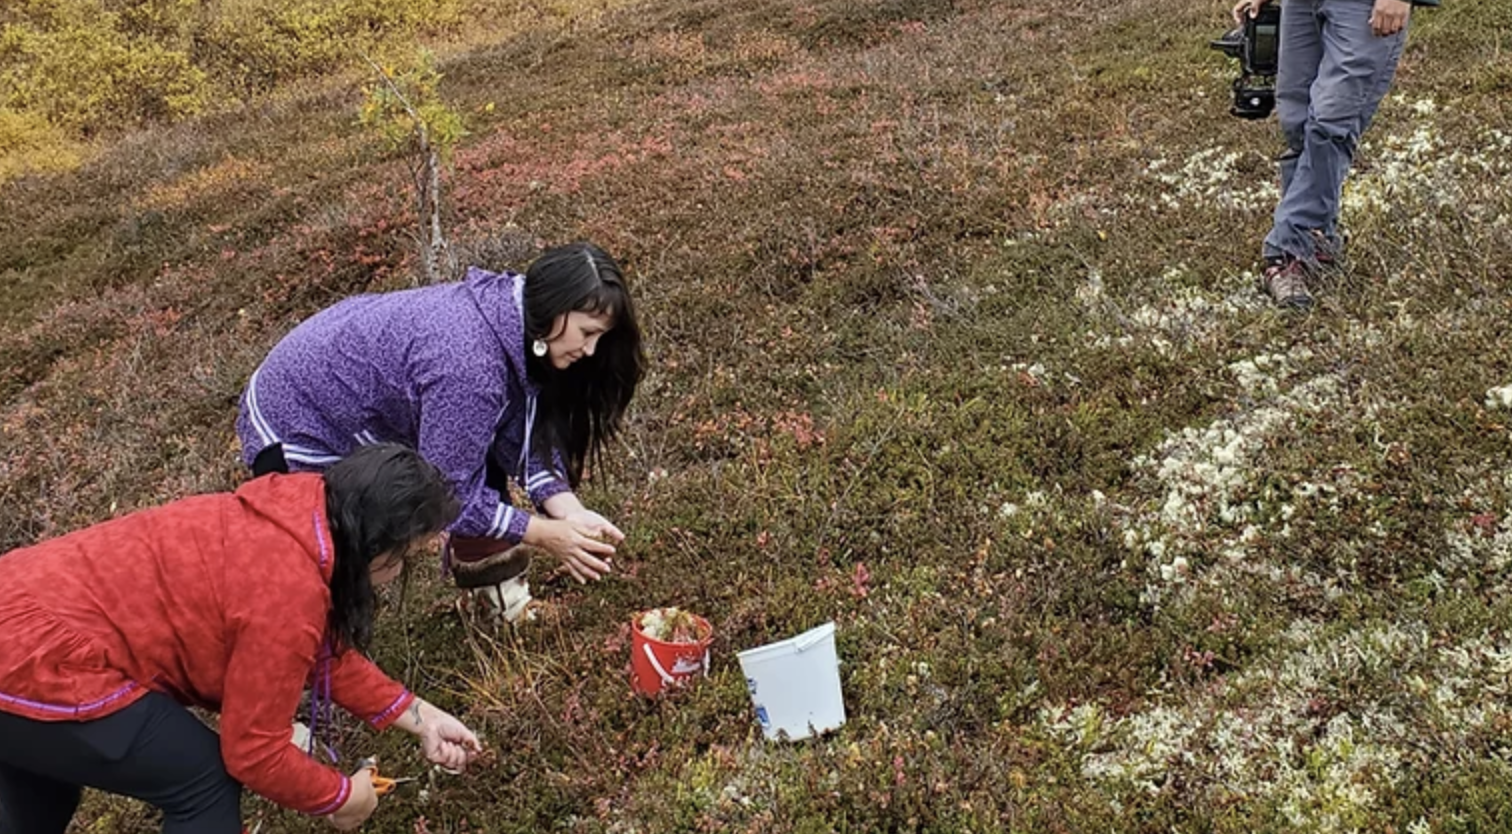 Two native women in red and purple hoodies planting seeds